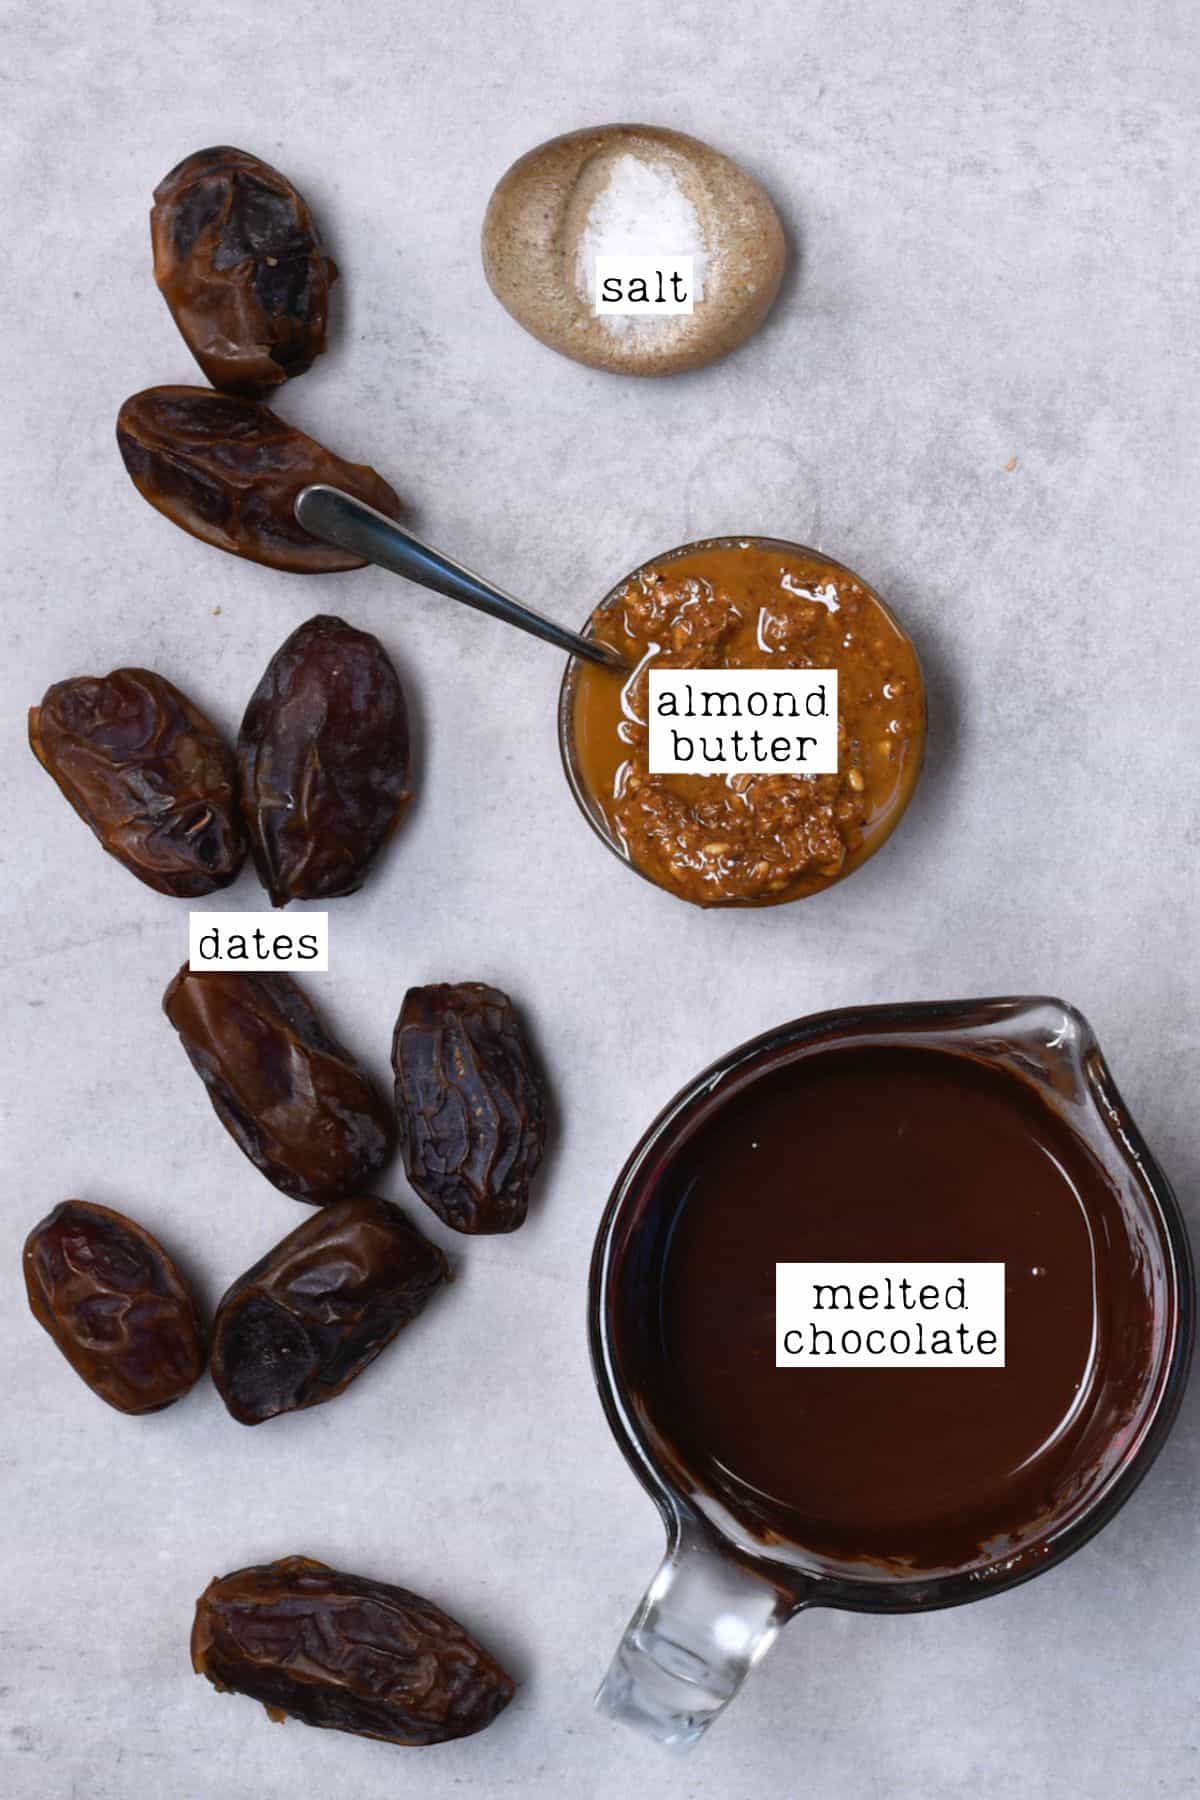 Ingredients for stuffing dates with almond butter